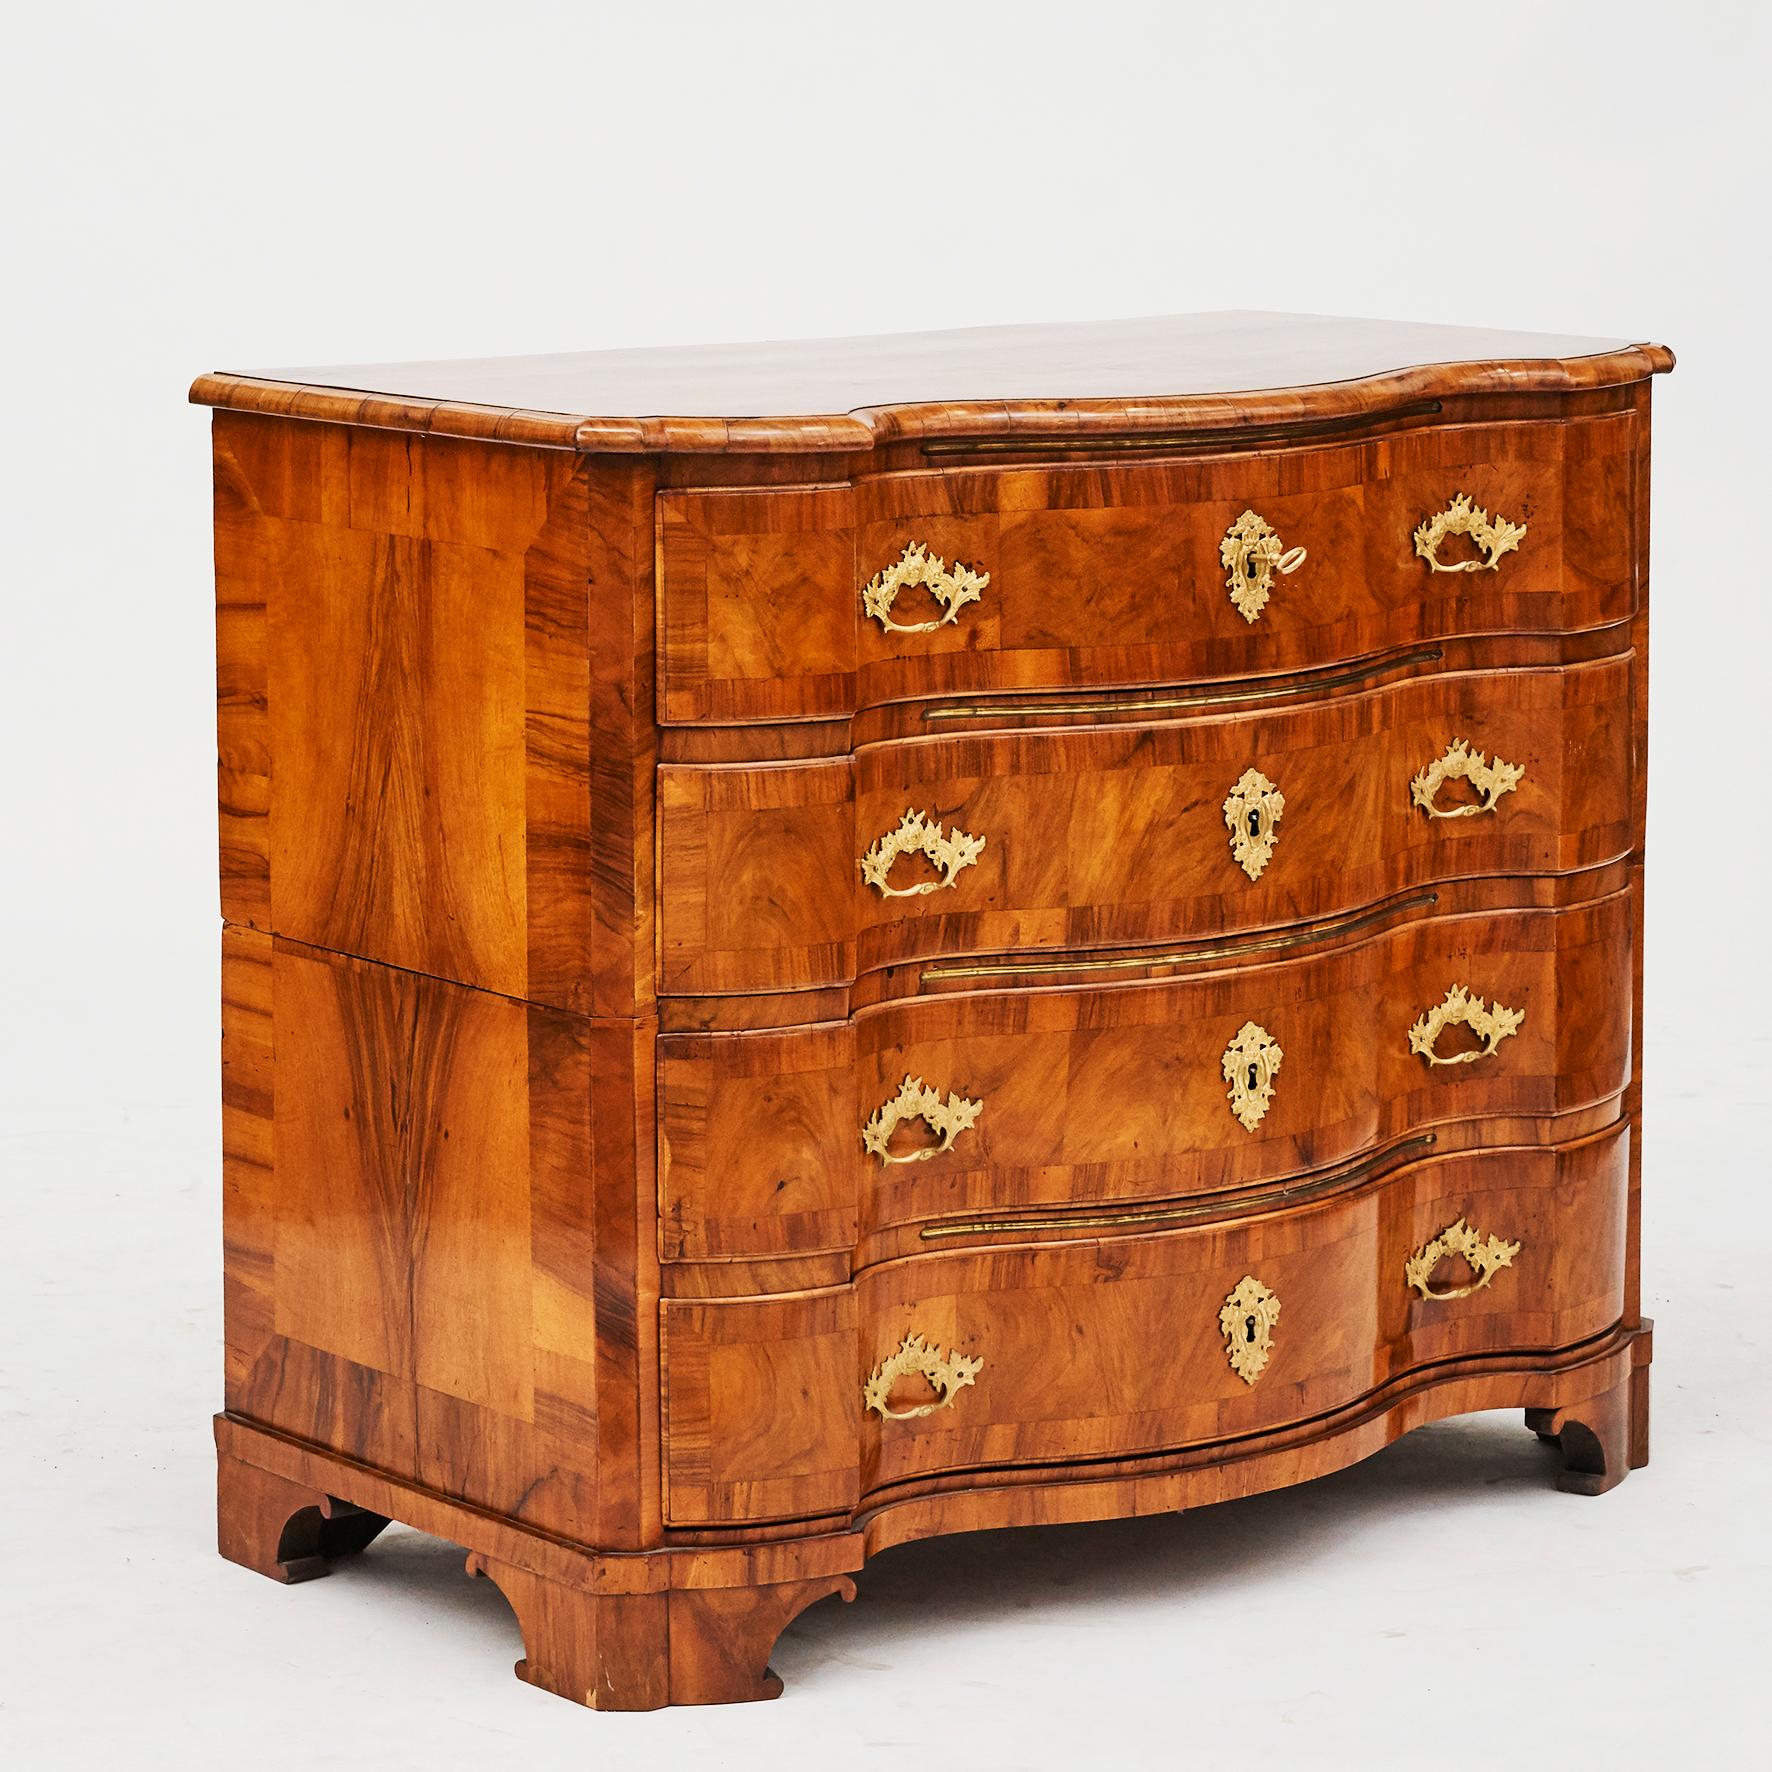 Baroque chest of drawers. Richly carved serpentine front and curvaceous top. Oak beautifully veneered with walnut. Brass moldings between each drawer, Denmark, circa 1730-1740.